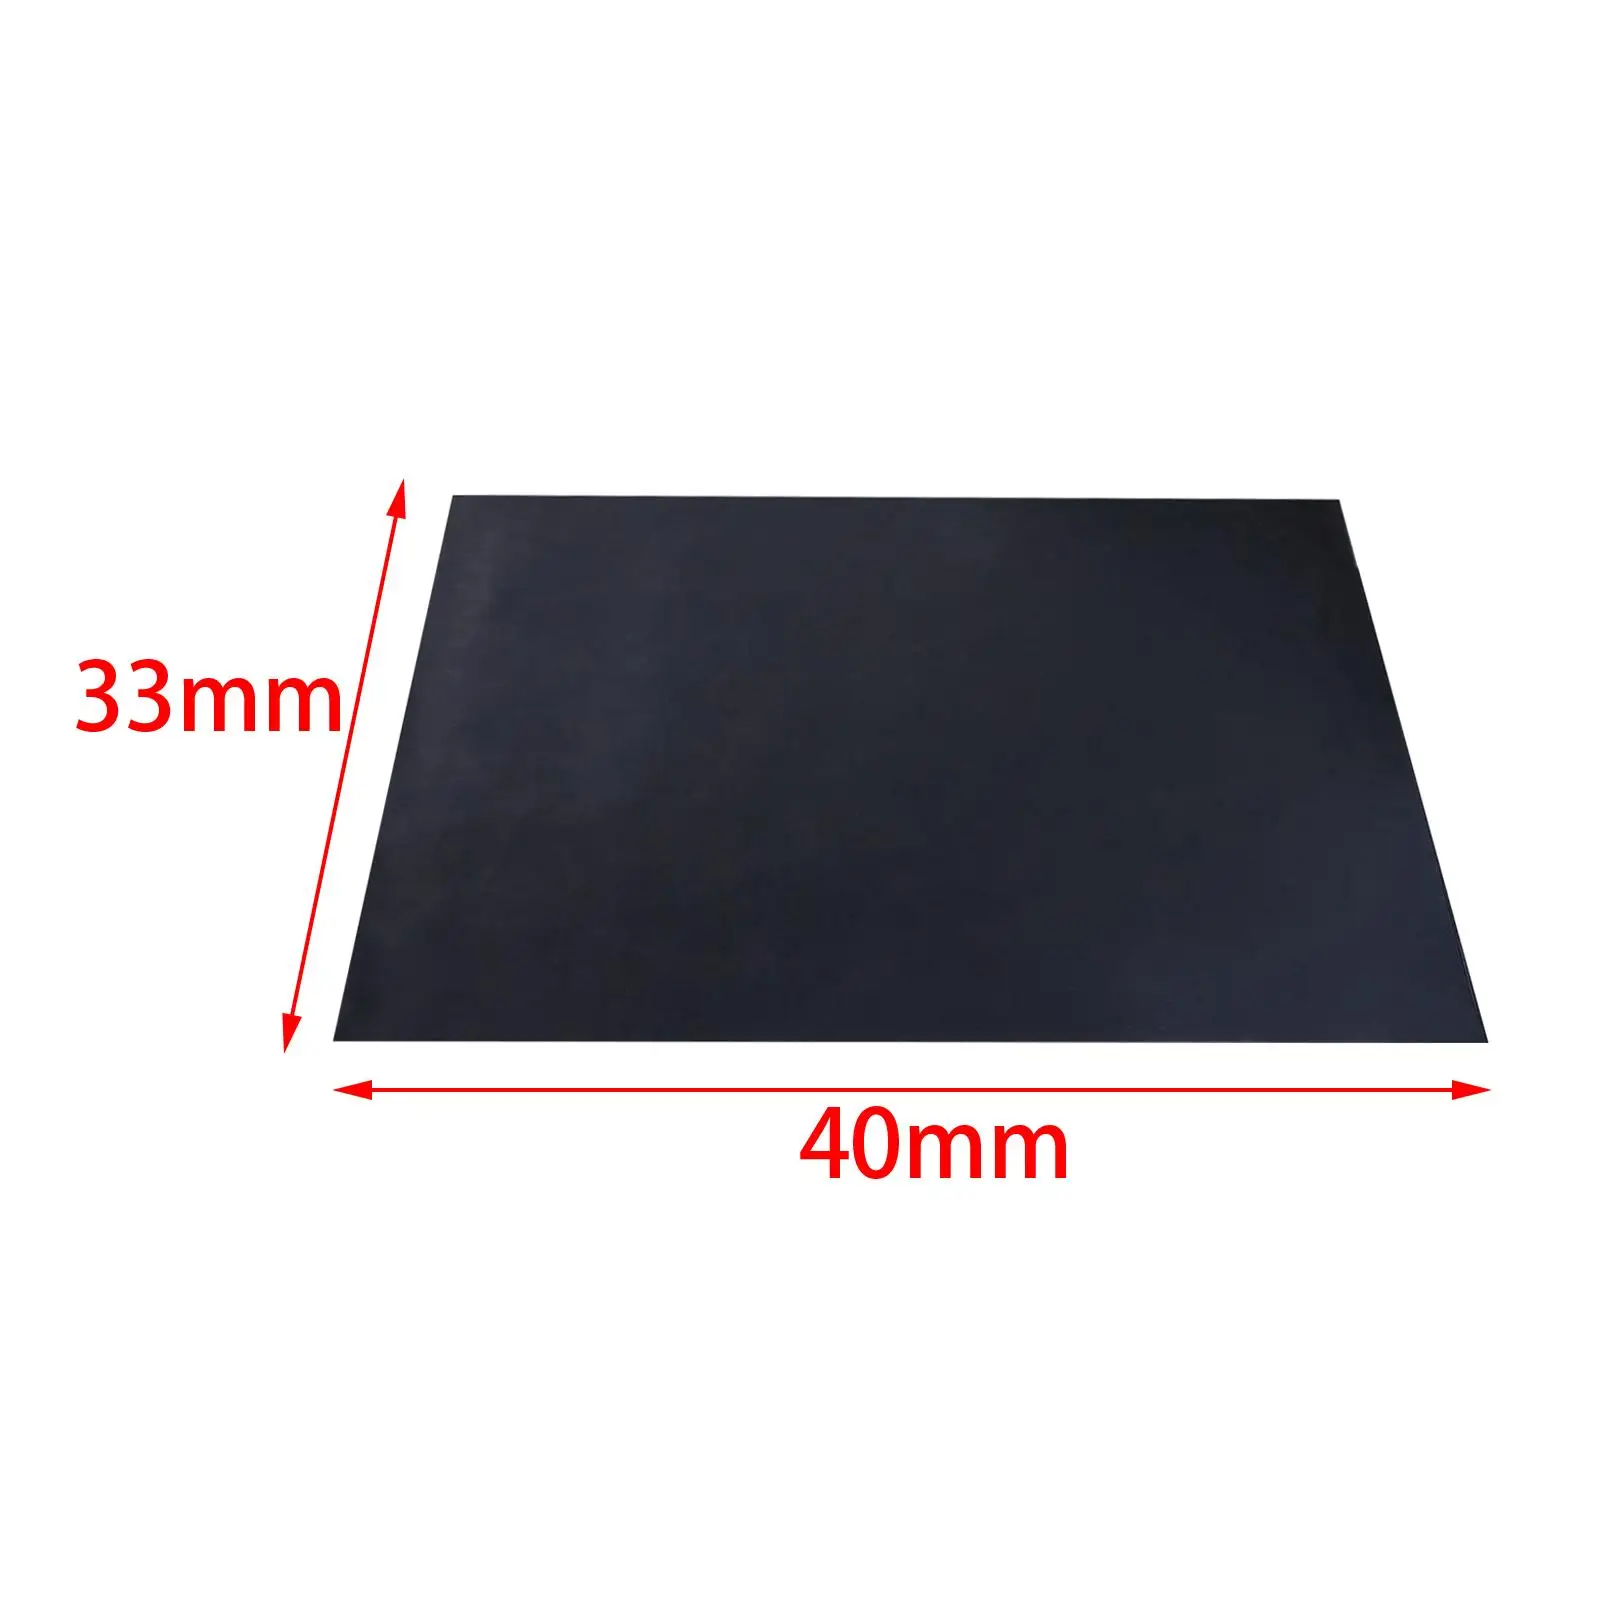 3 Pieces Baking Sheet Pan Liners for Kitchen Camping Outdoor